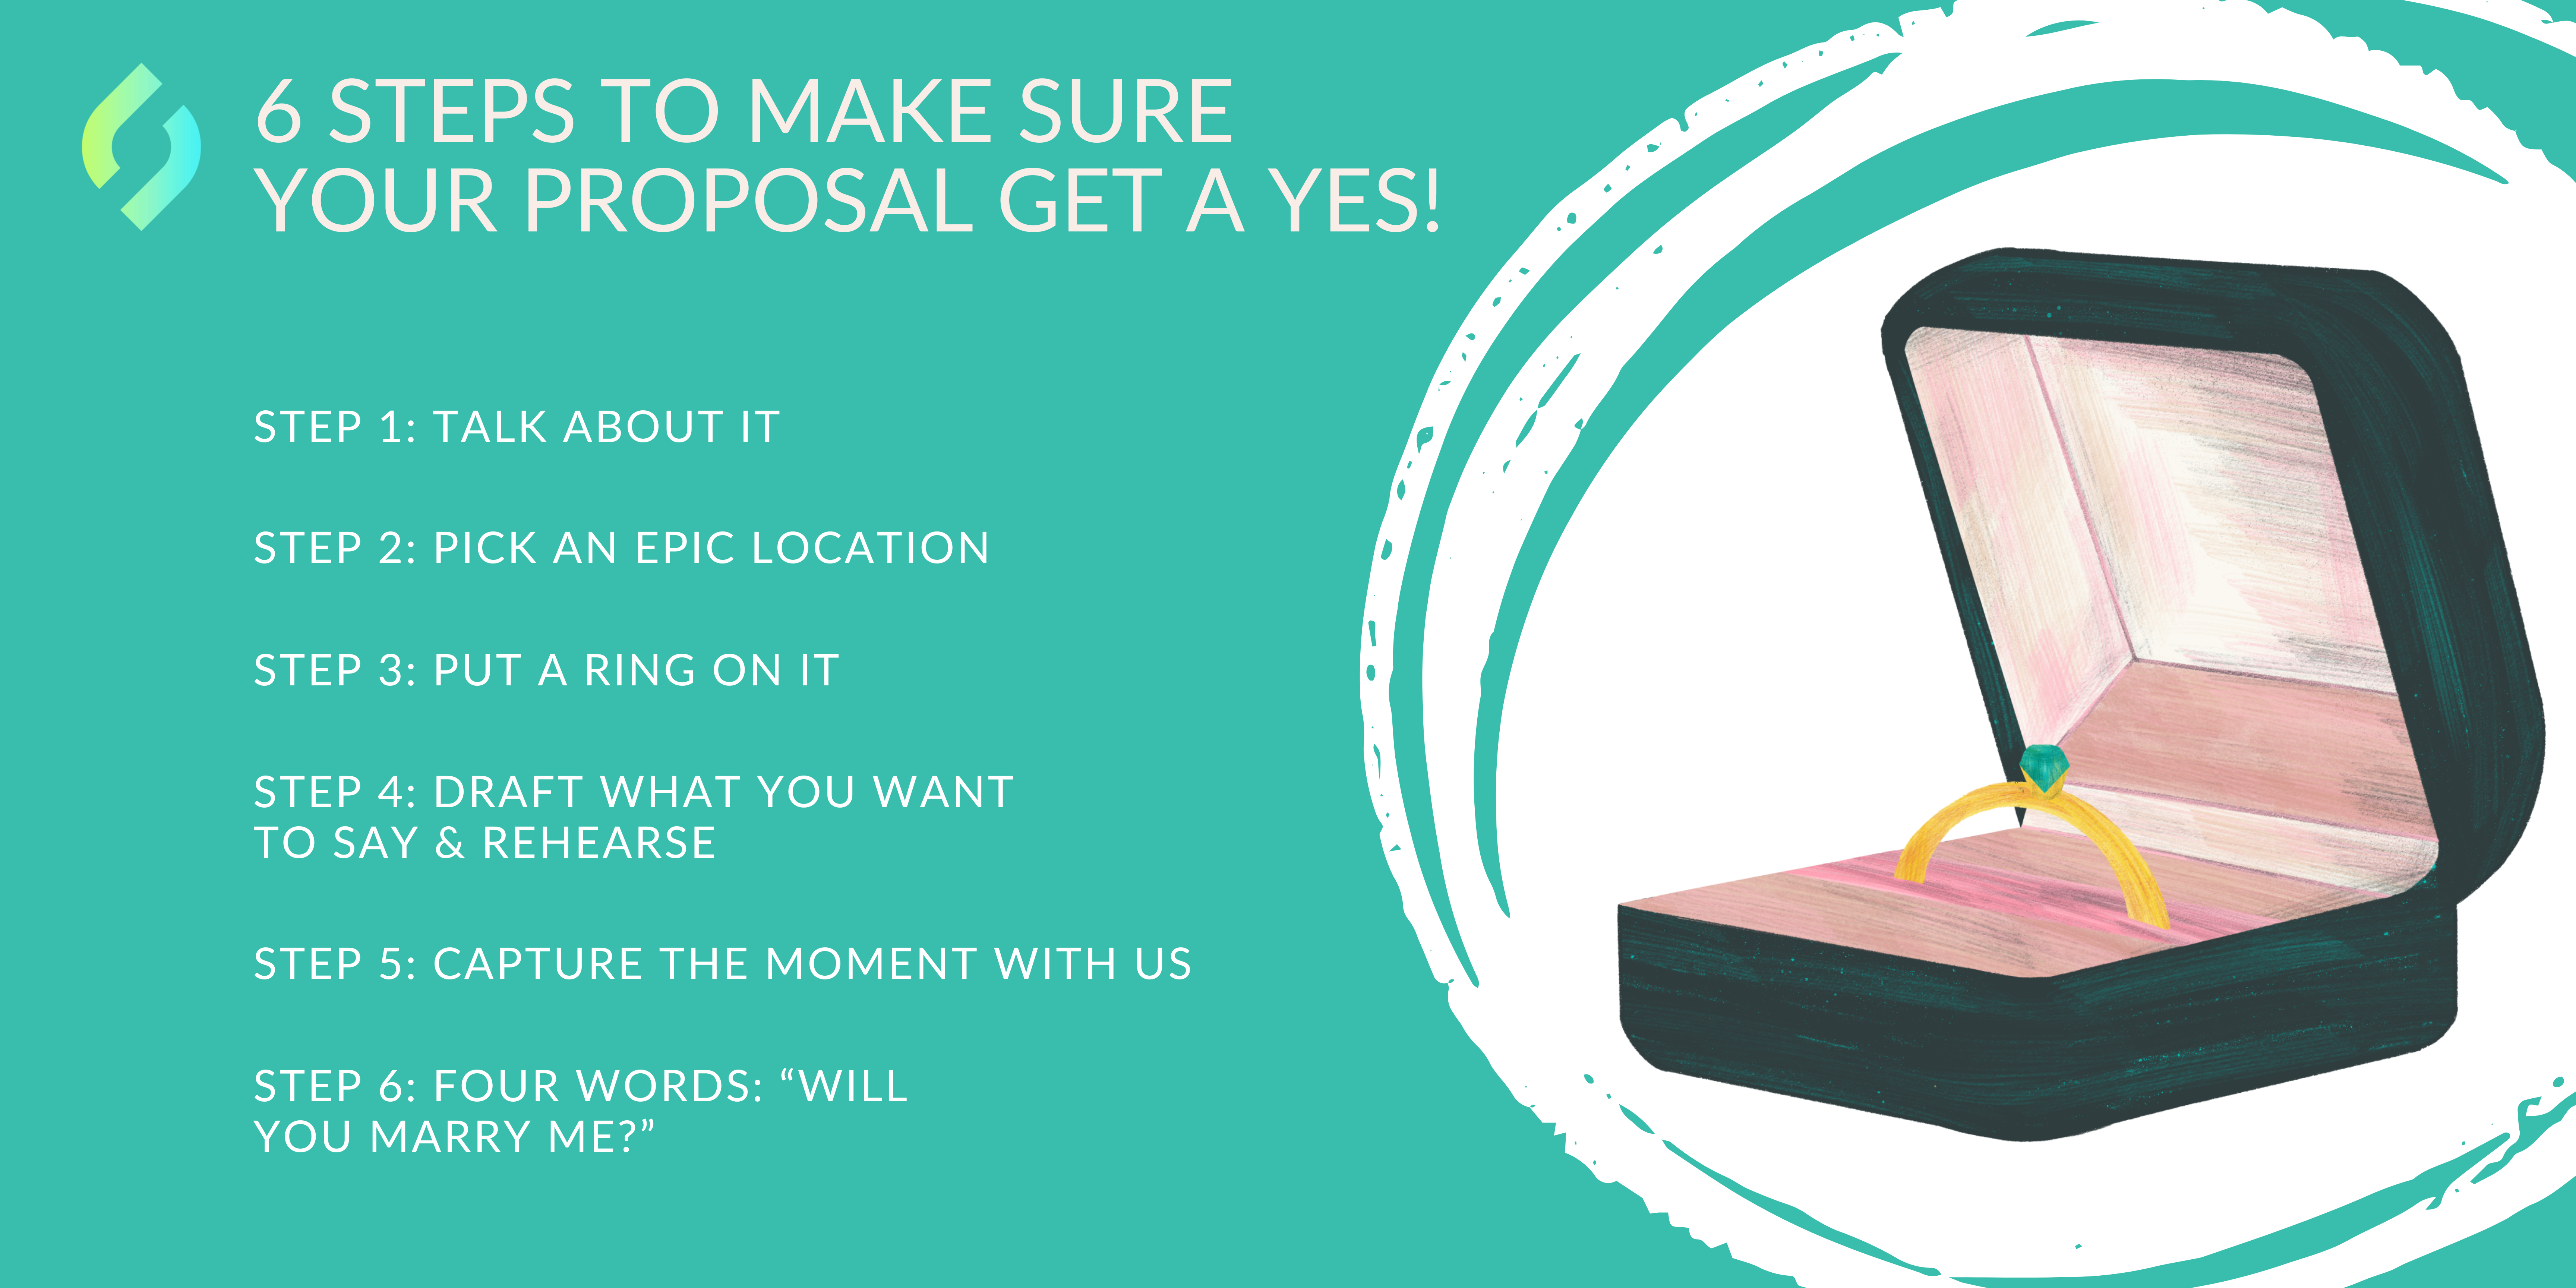 6 Steps To Make Sure Your Proposal Get A Yes!